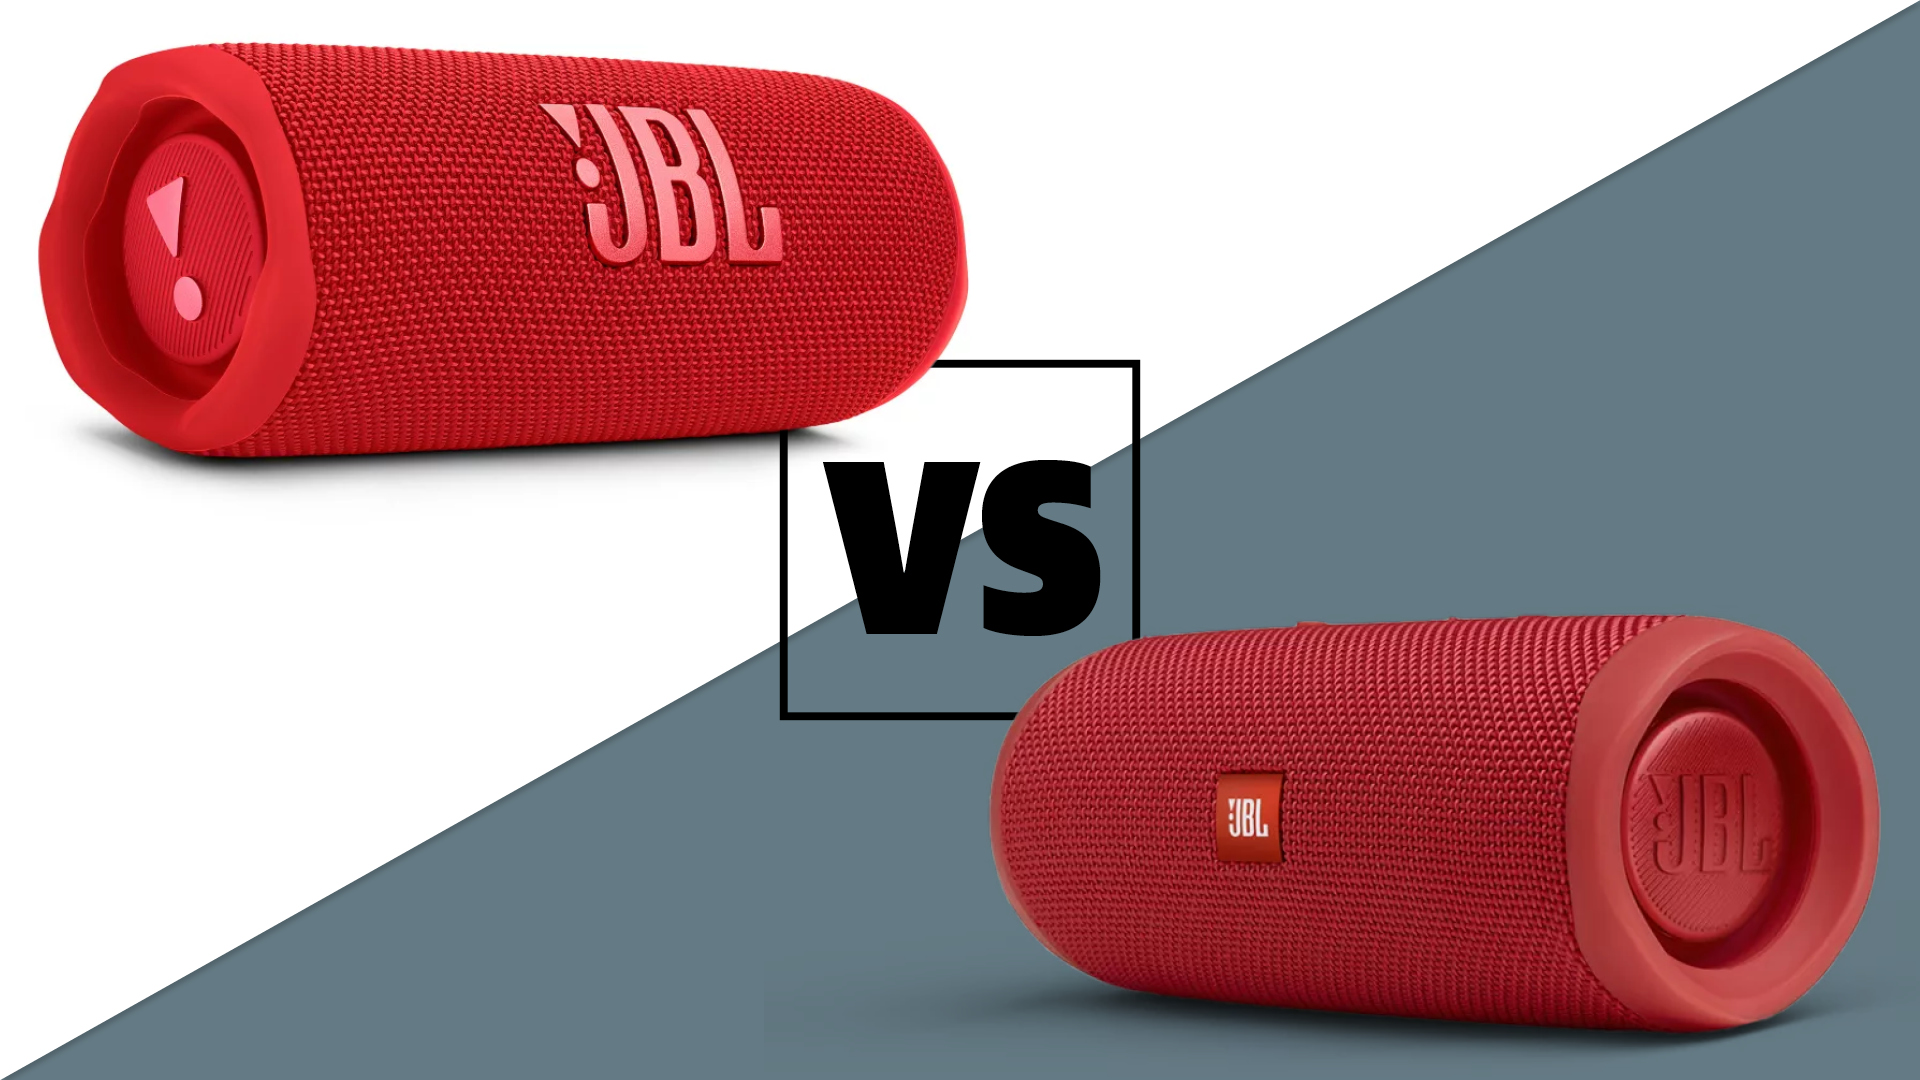 JBL Charge 4 vs Flip 5: 6 Key Differences and Full Comparison -  History-Computer